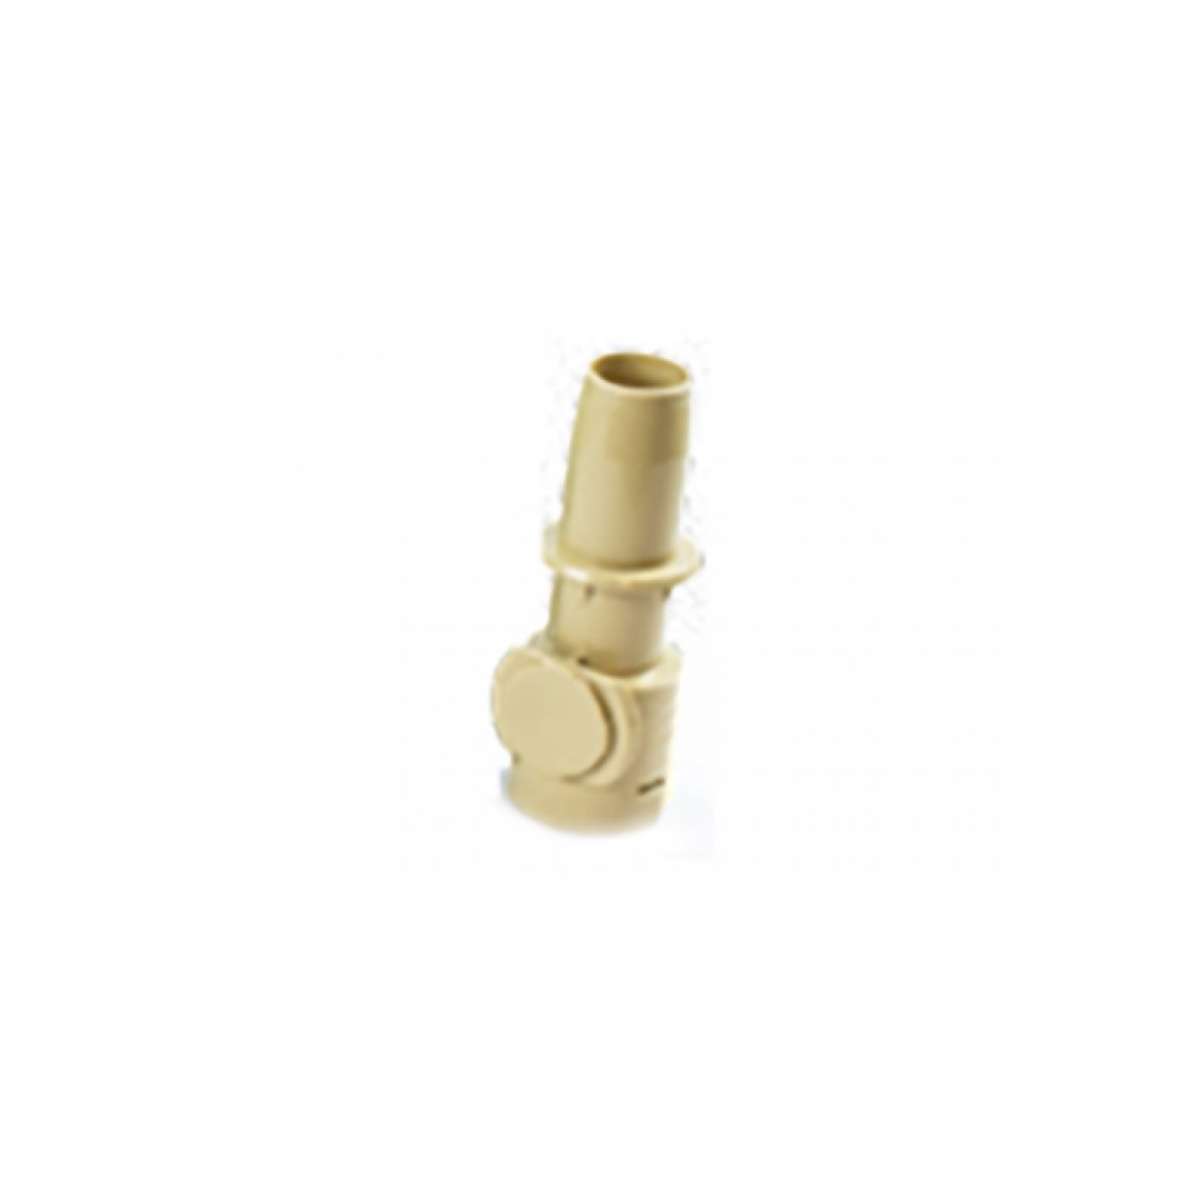 IsoLink 5" Rigid Spout with 1" Tip - Beige